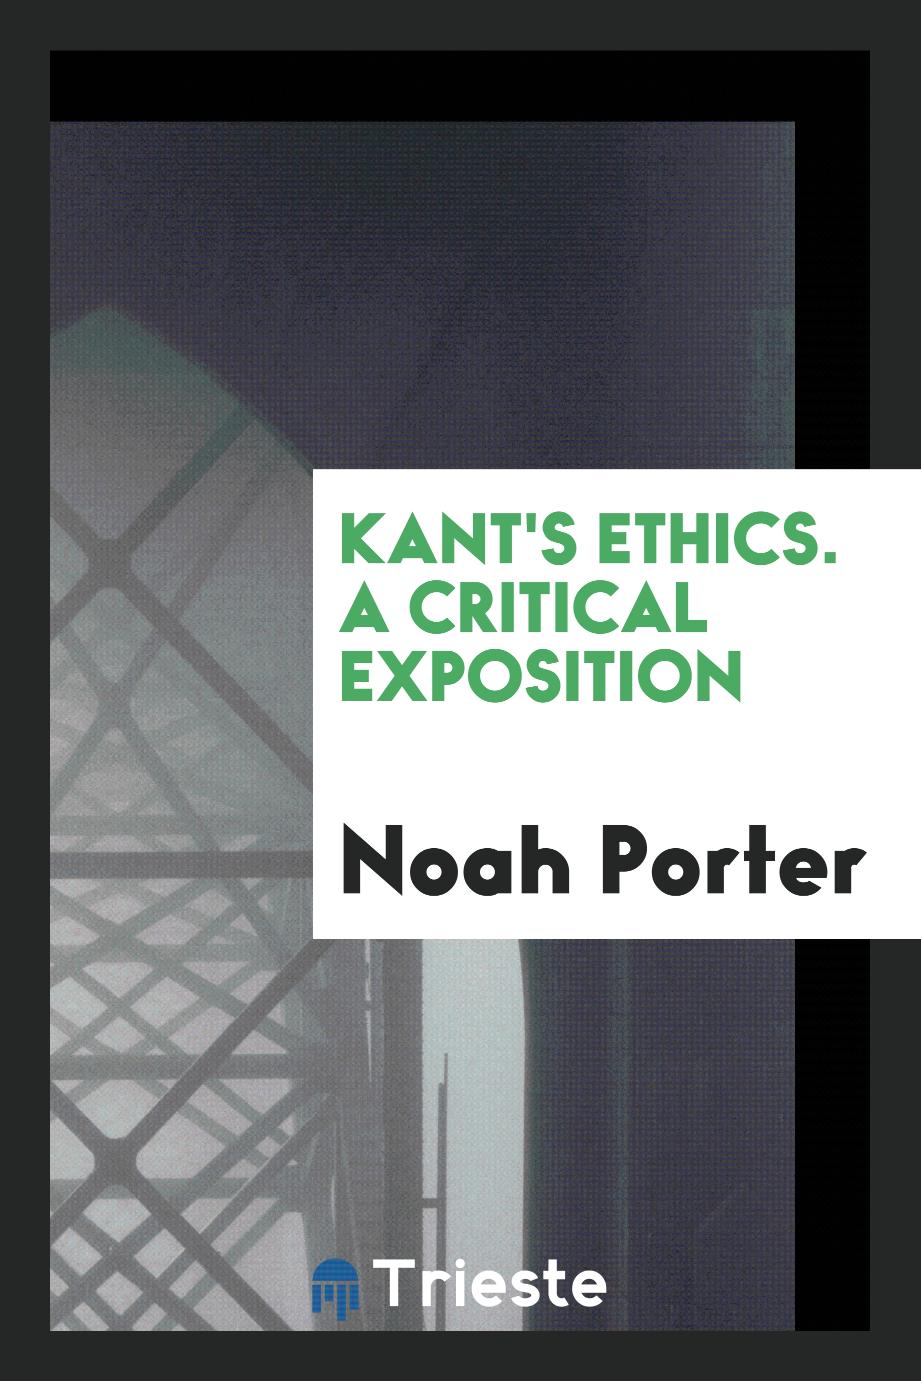 Kant's ethics. A critical exposition